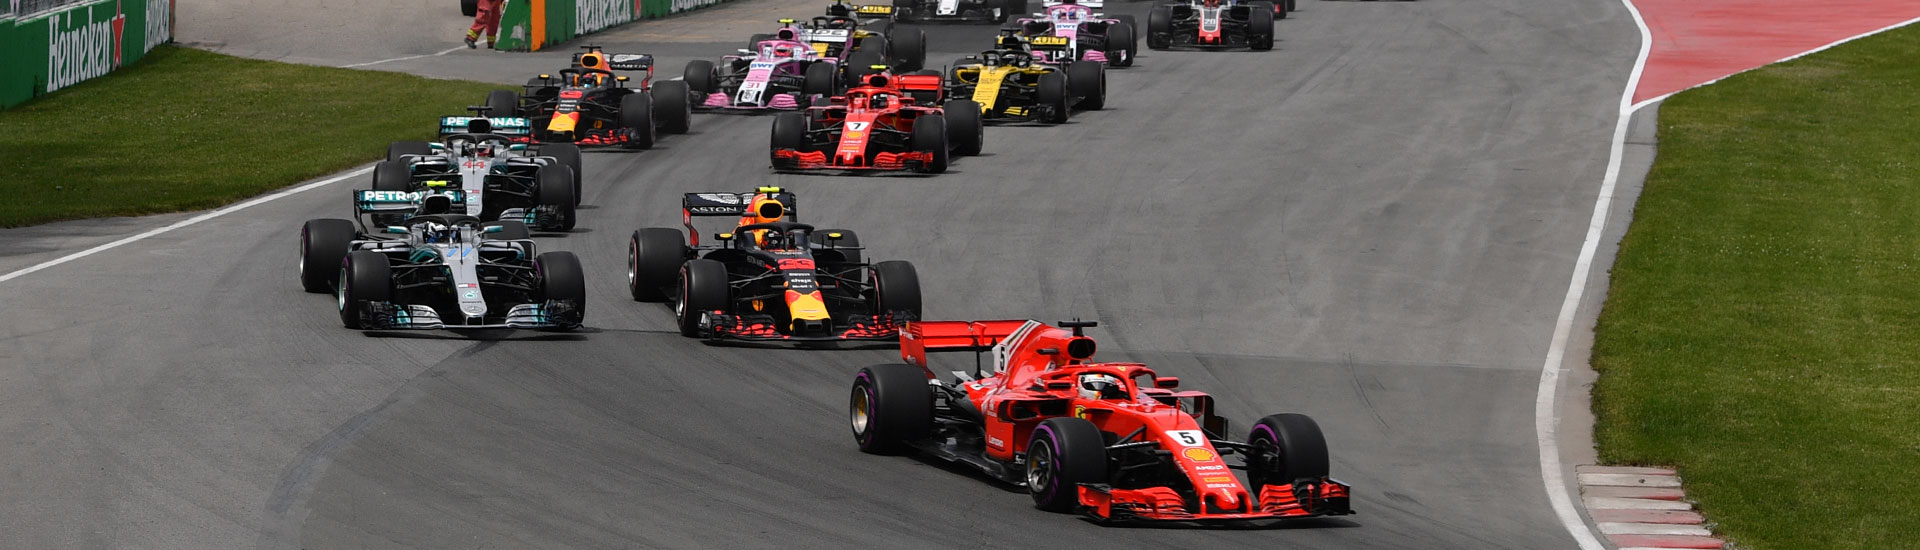 montreal f1 2018 tickets